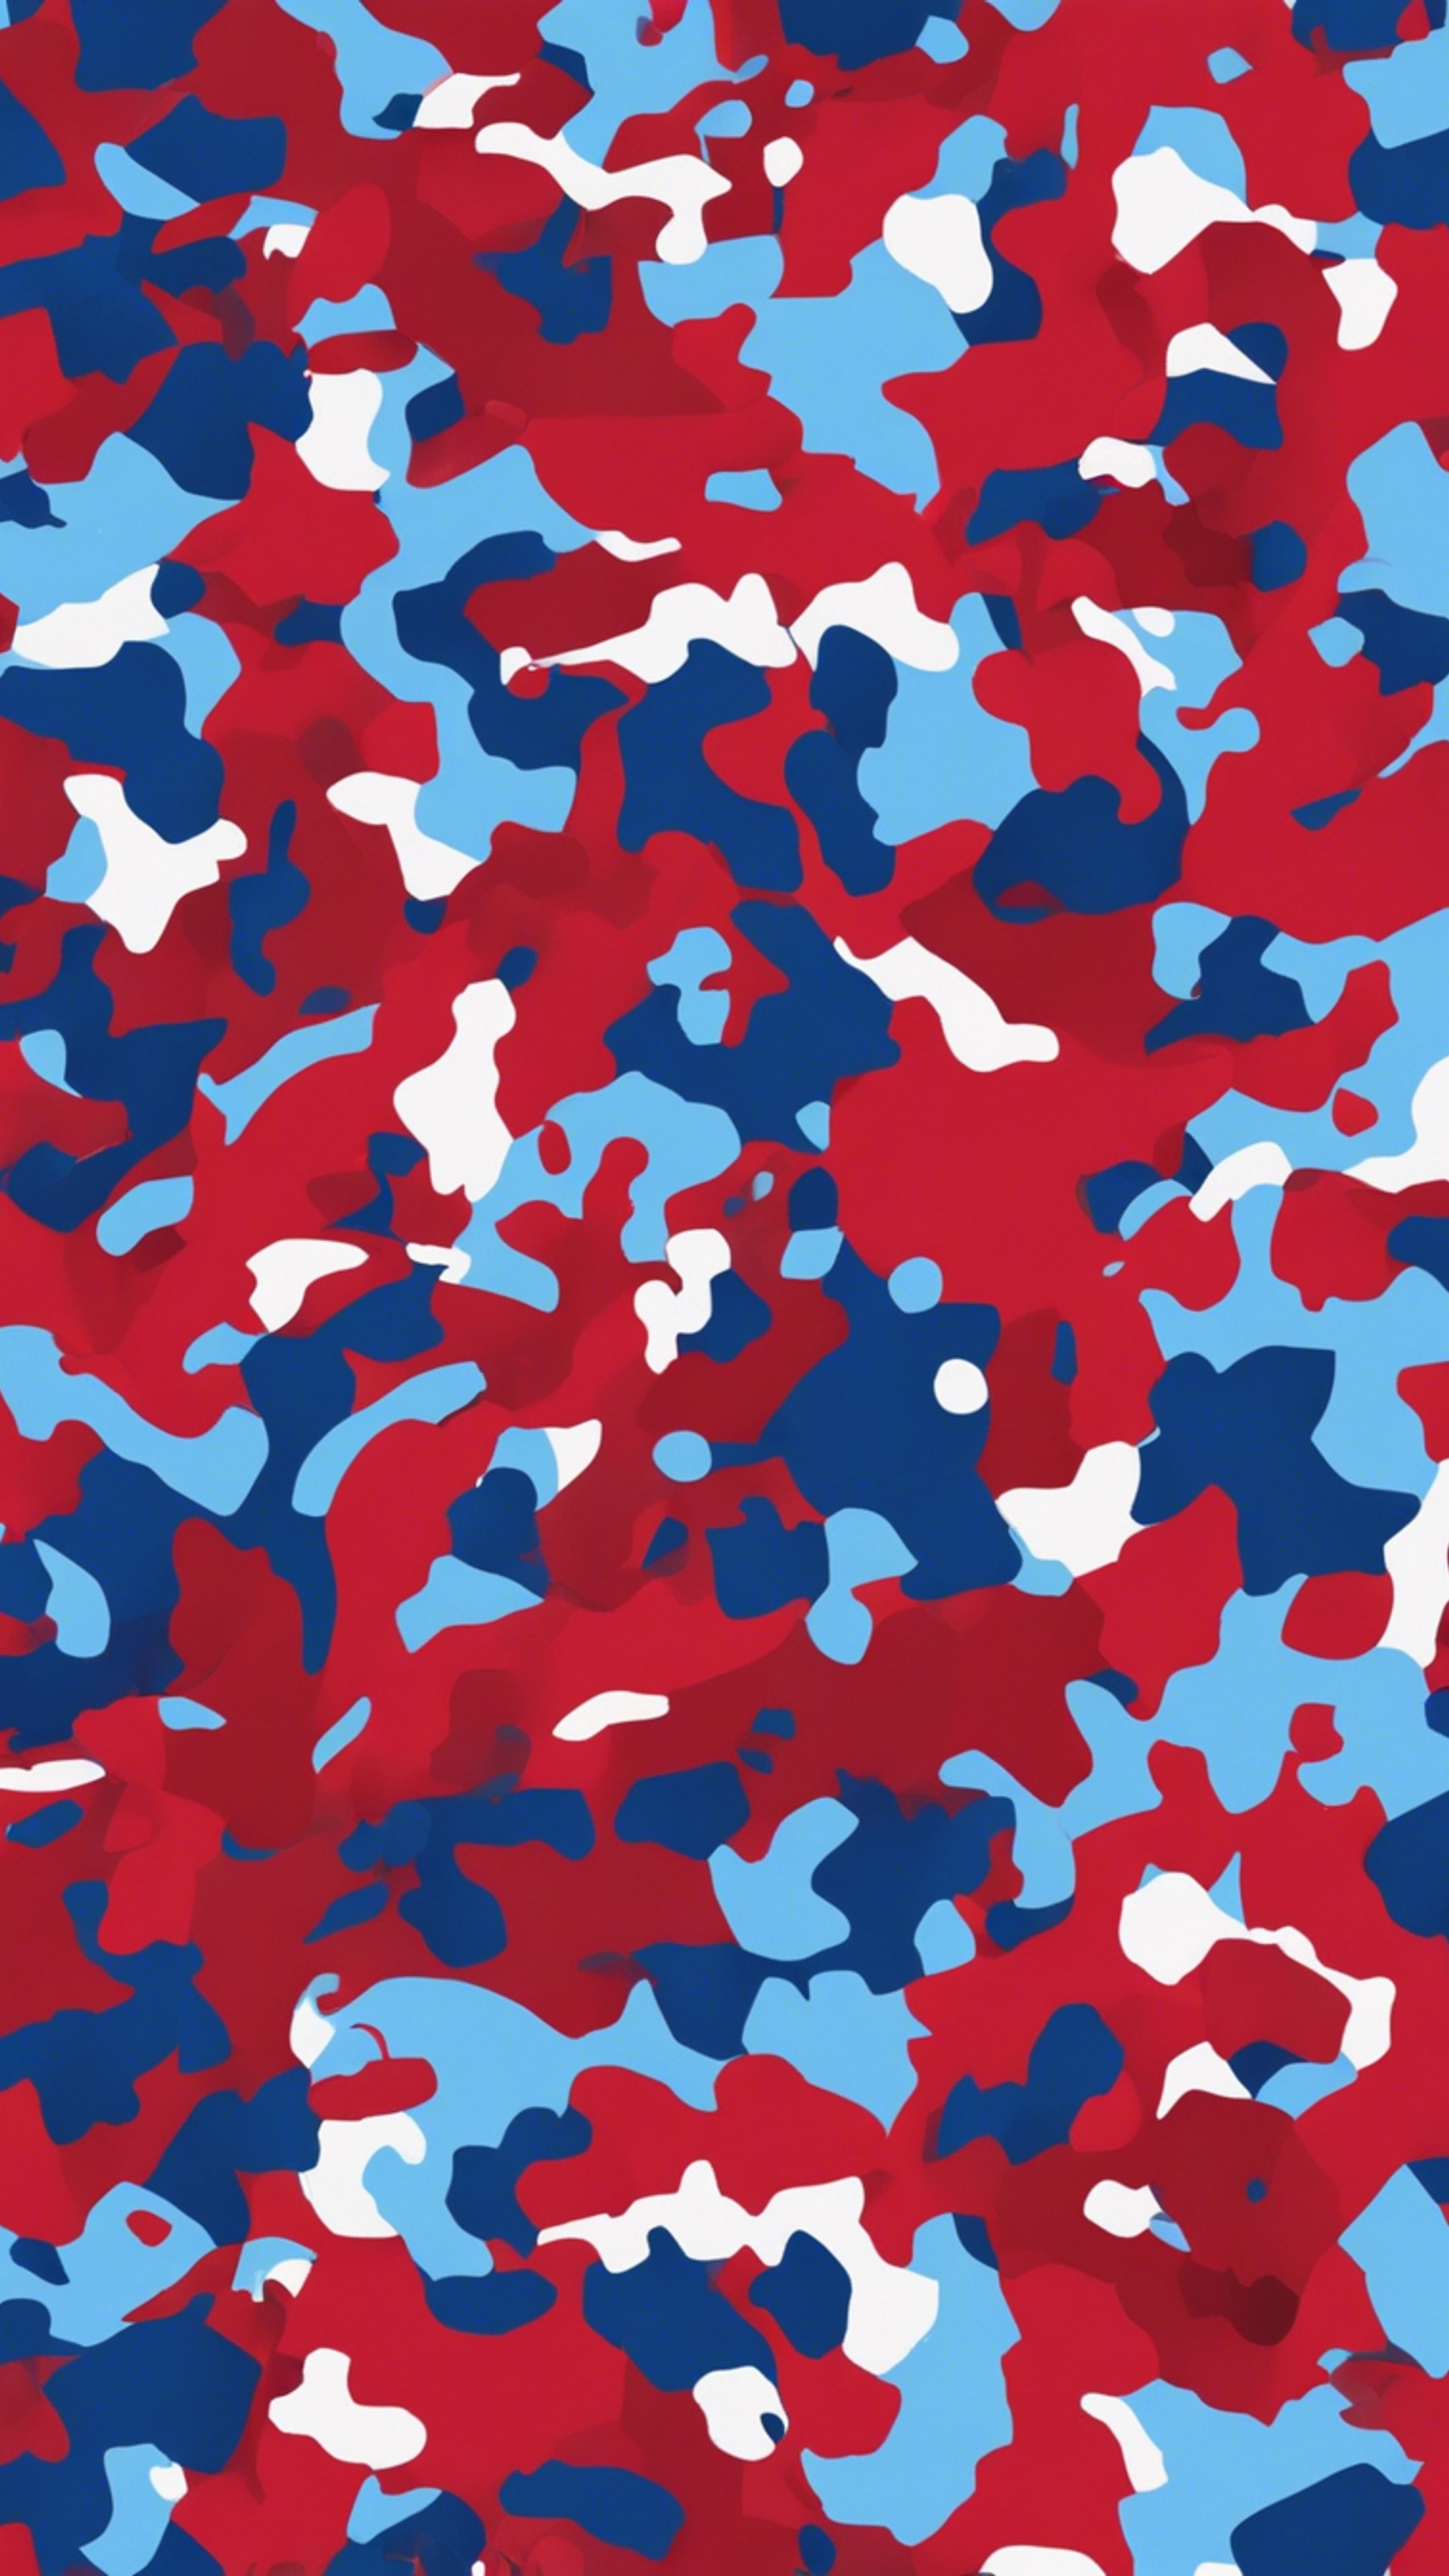 Camouflage pattern in shades of red and blue distributed randomly. Taustakuva[29e12ceb4fee465f920c]